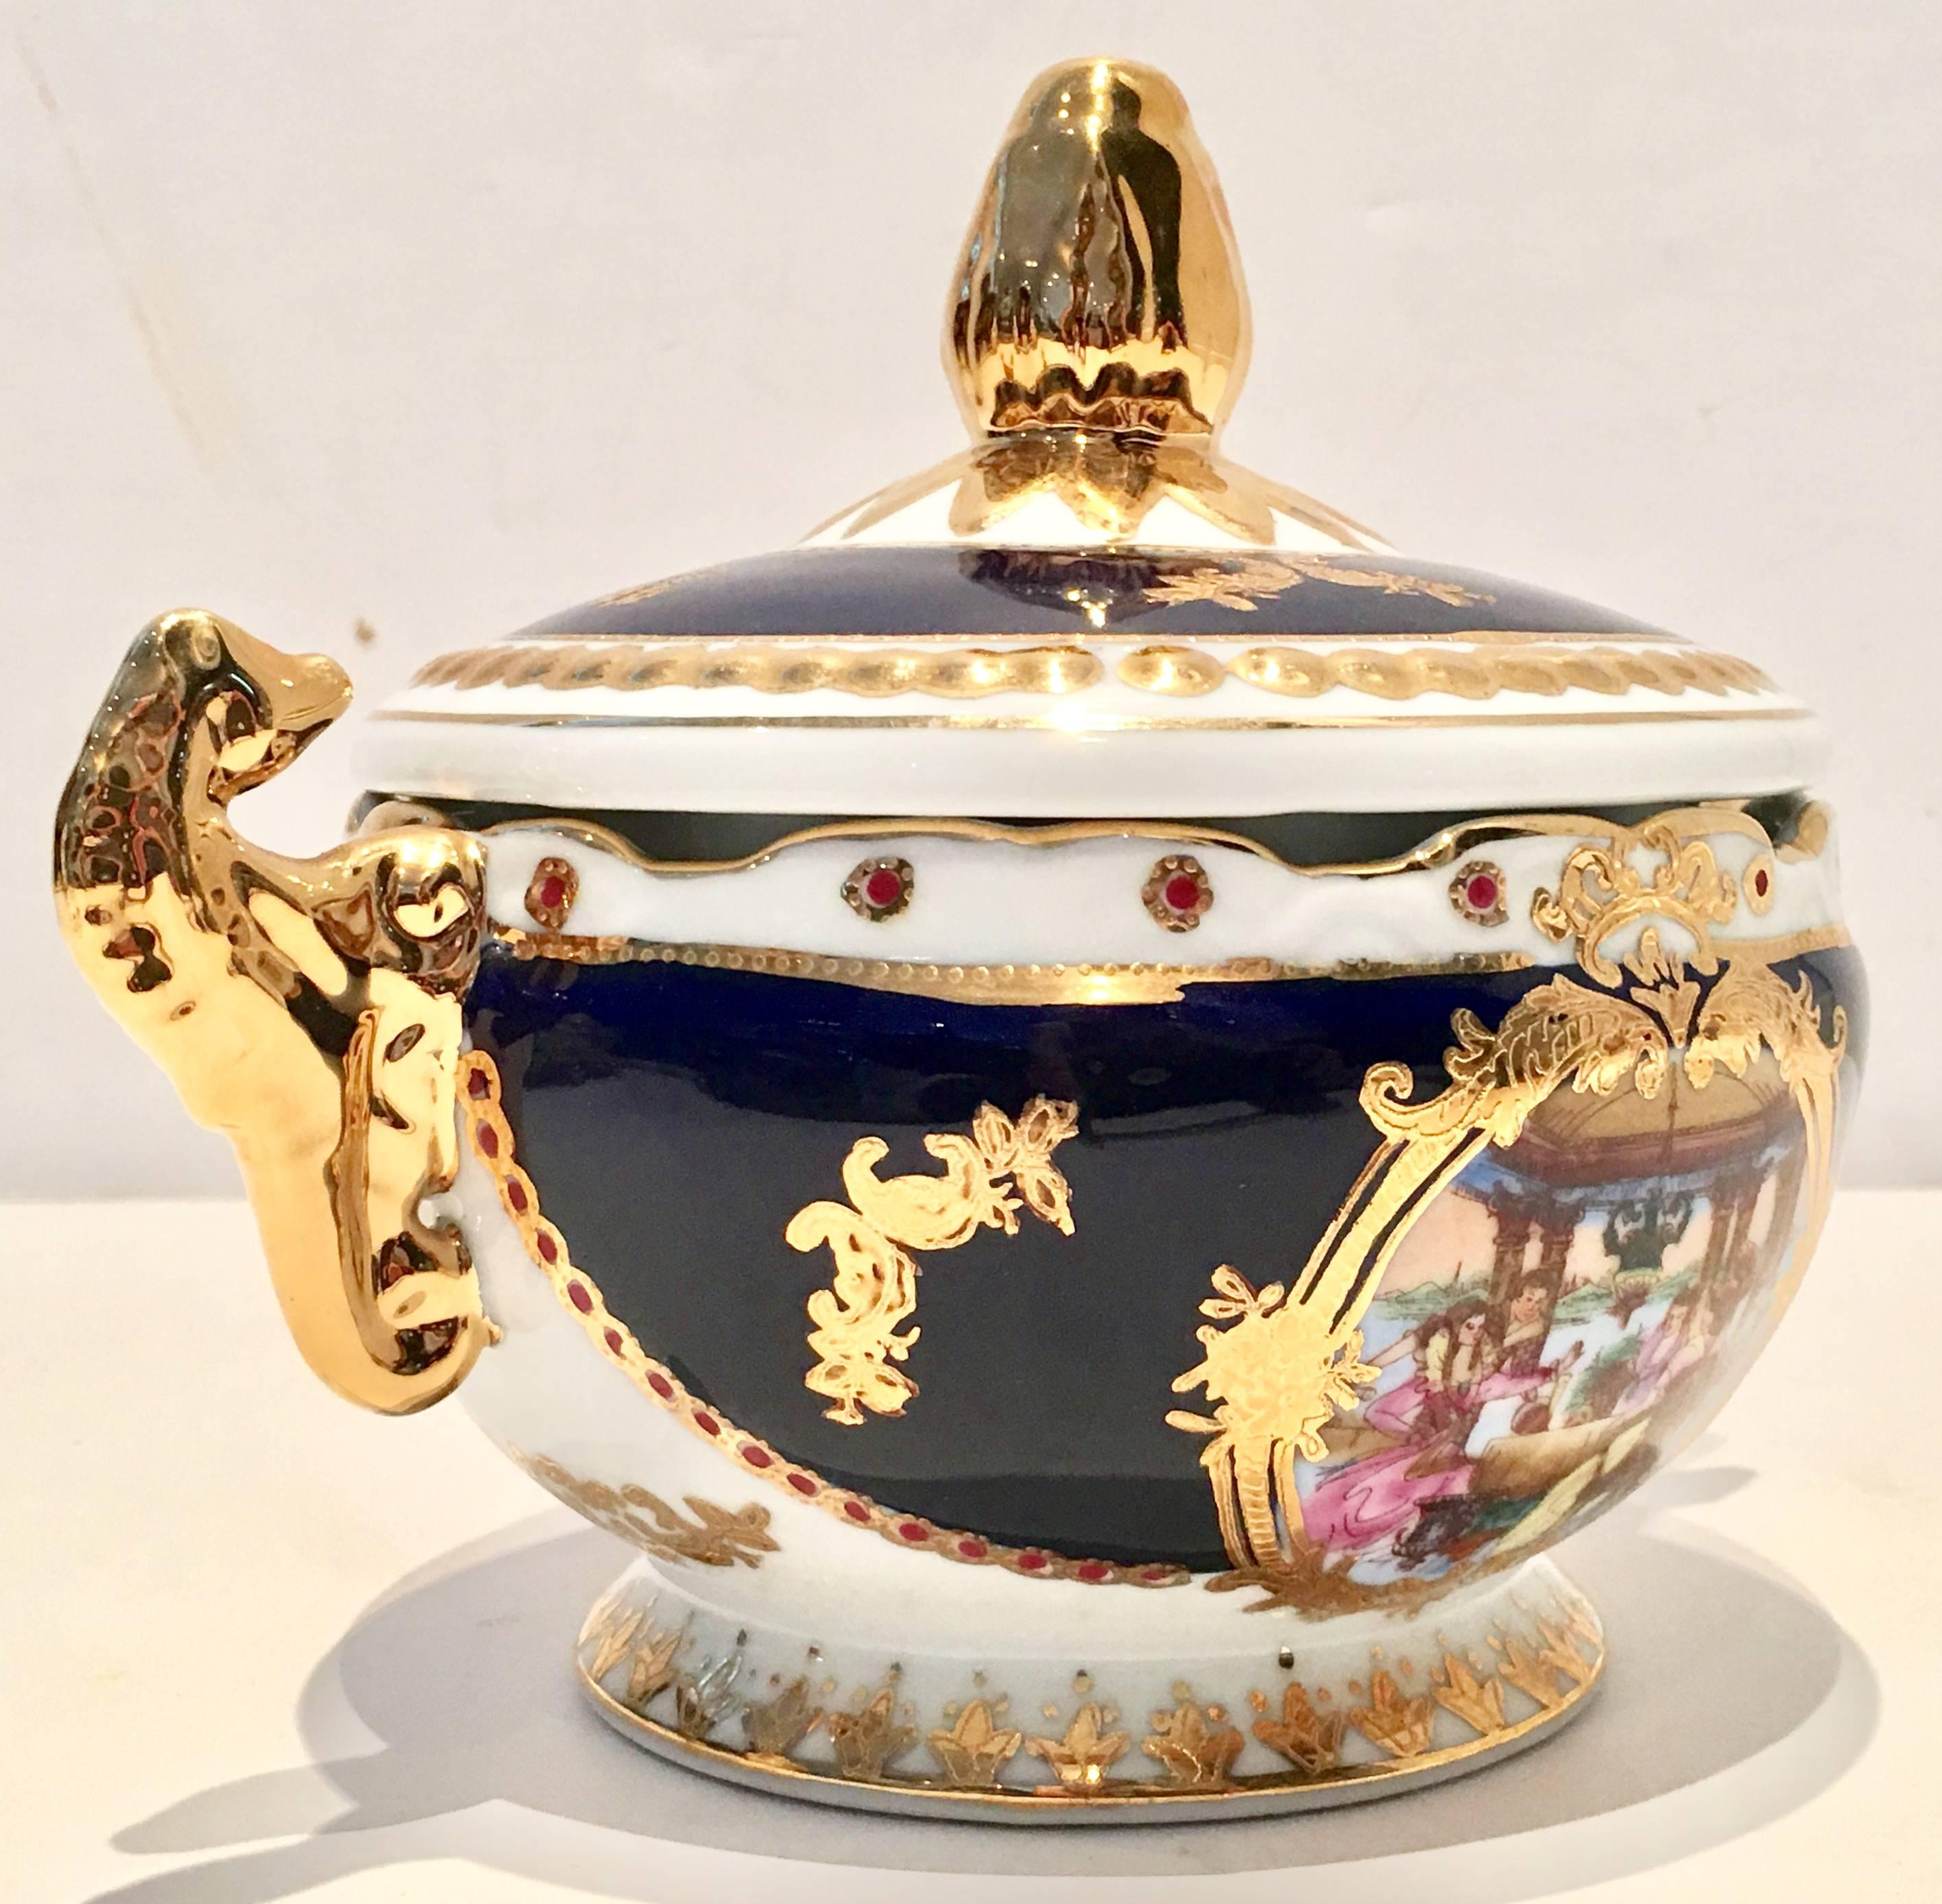 Mid-Century porcelain, Limoges cobalt and 22-karat gold lidded jar. This ornate and heavily gilded and decorated French Sèvres style two-piece lidded jar features a bright white and cobalt ground with a two sided 18th century group of diners eating